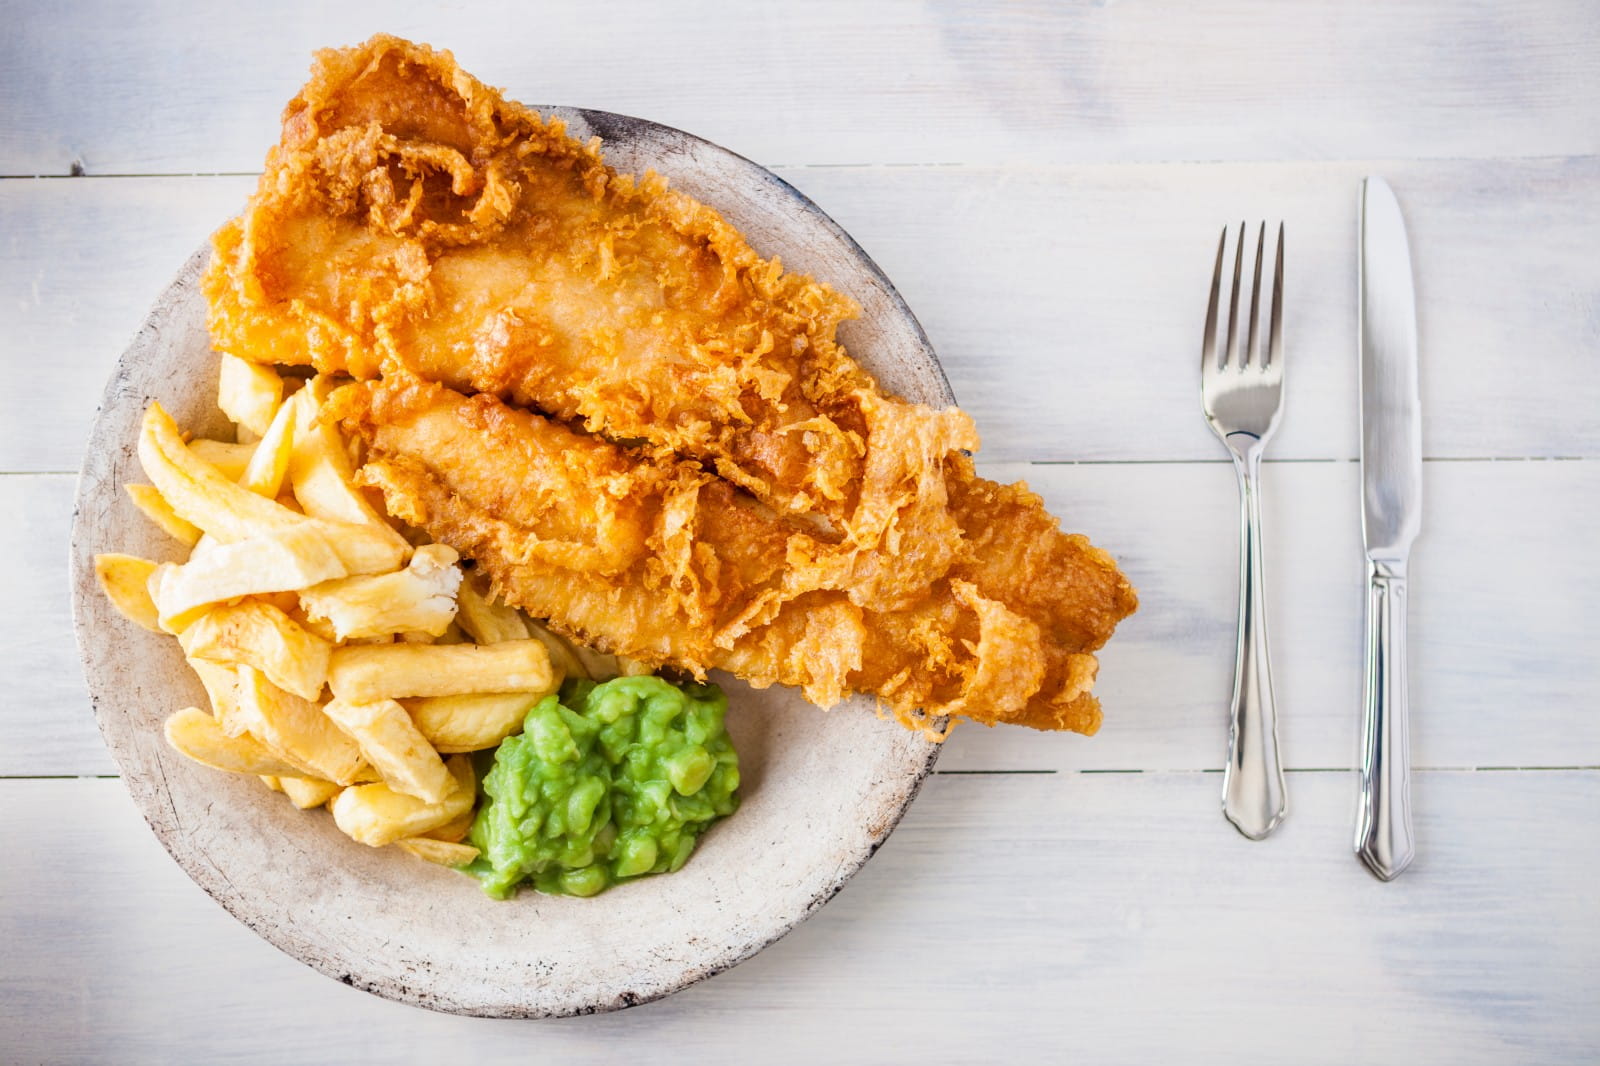 6 of the best matches for fish and chips